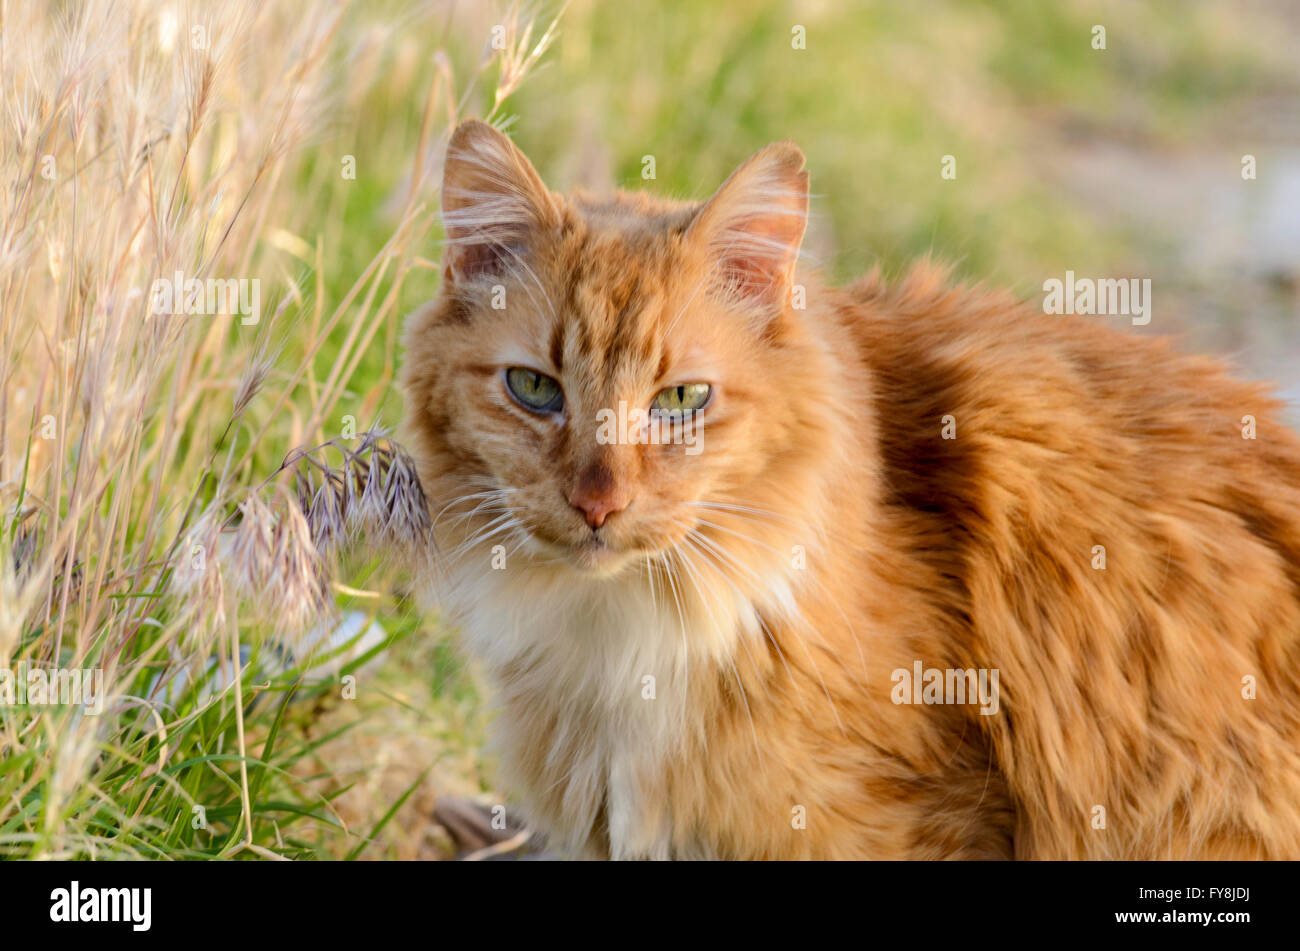 Orange And White Cat In Long Grass Looking Toward Camera Stock Photo Alamy